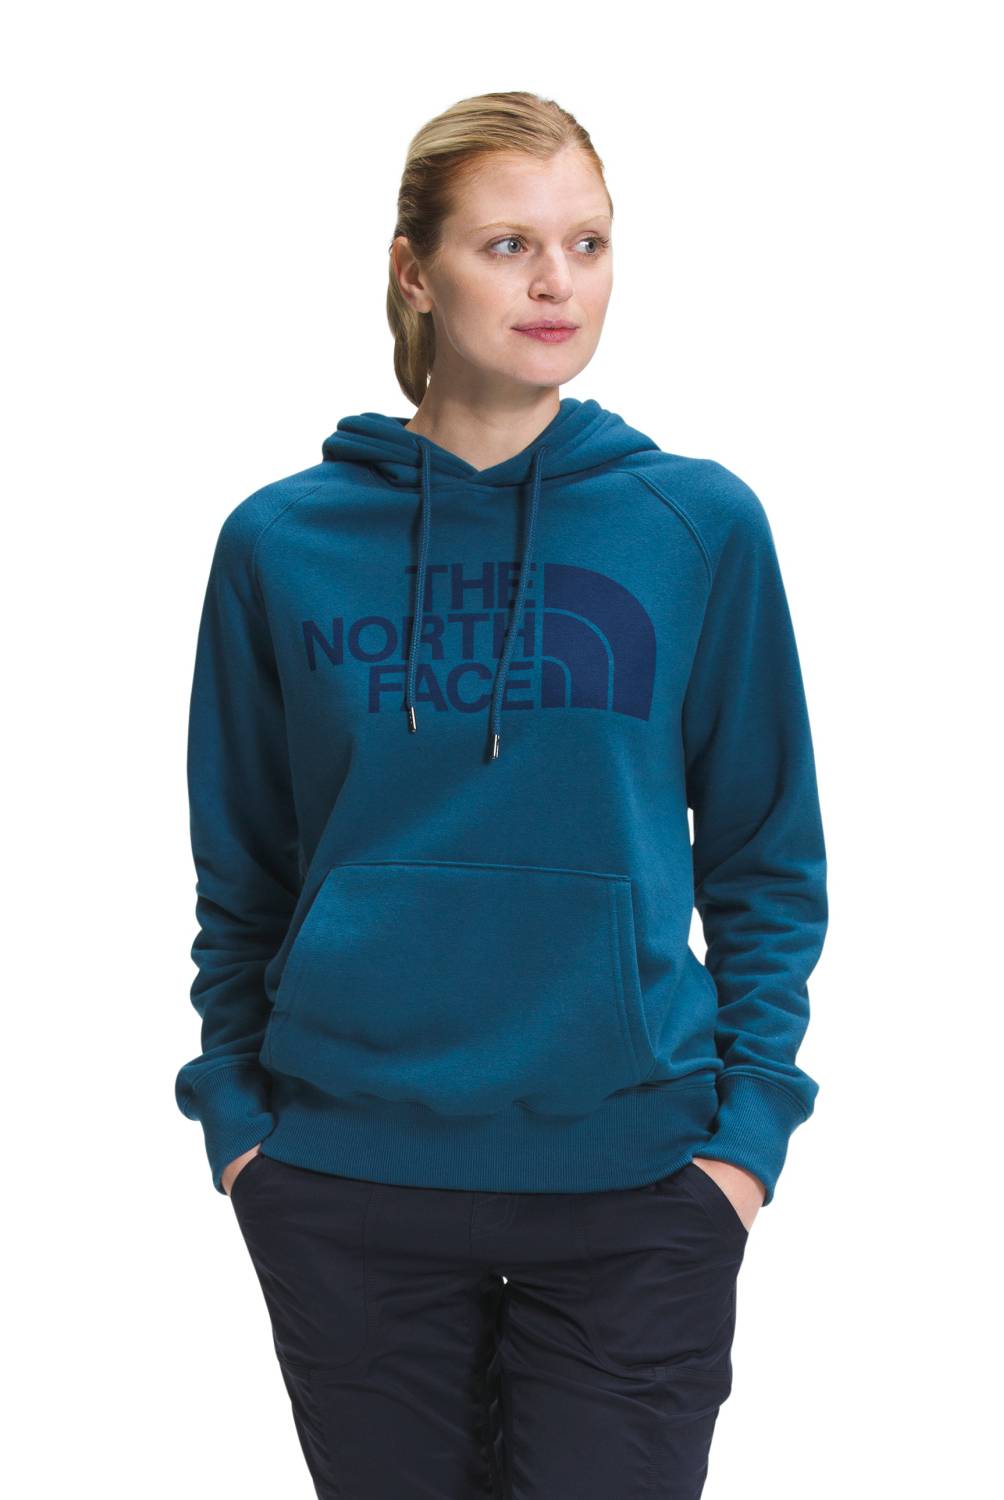 THE NORTH FACE - Poleron casual outdoor mujer